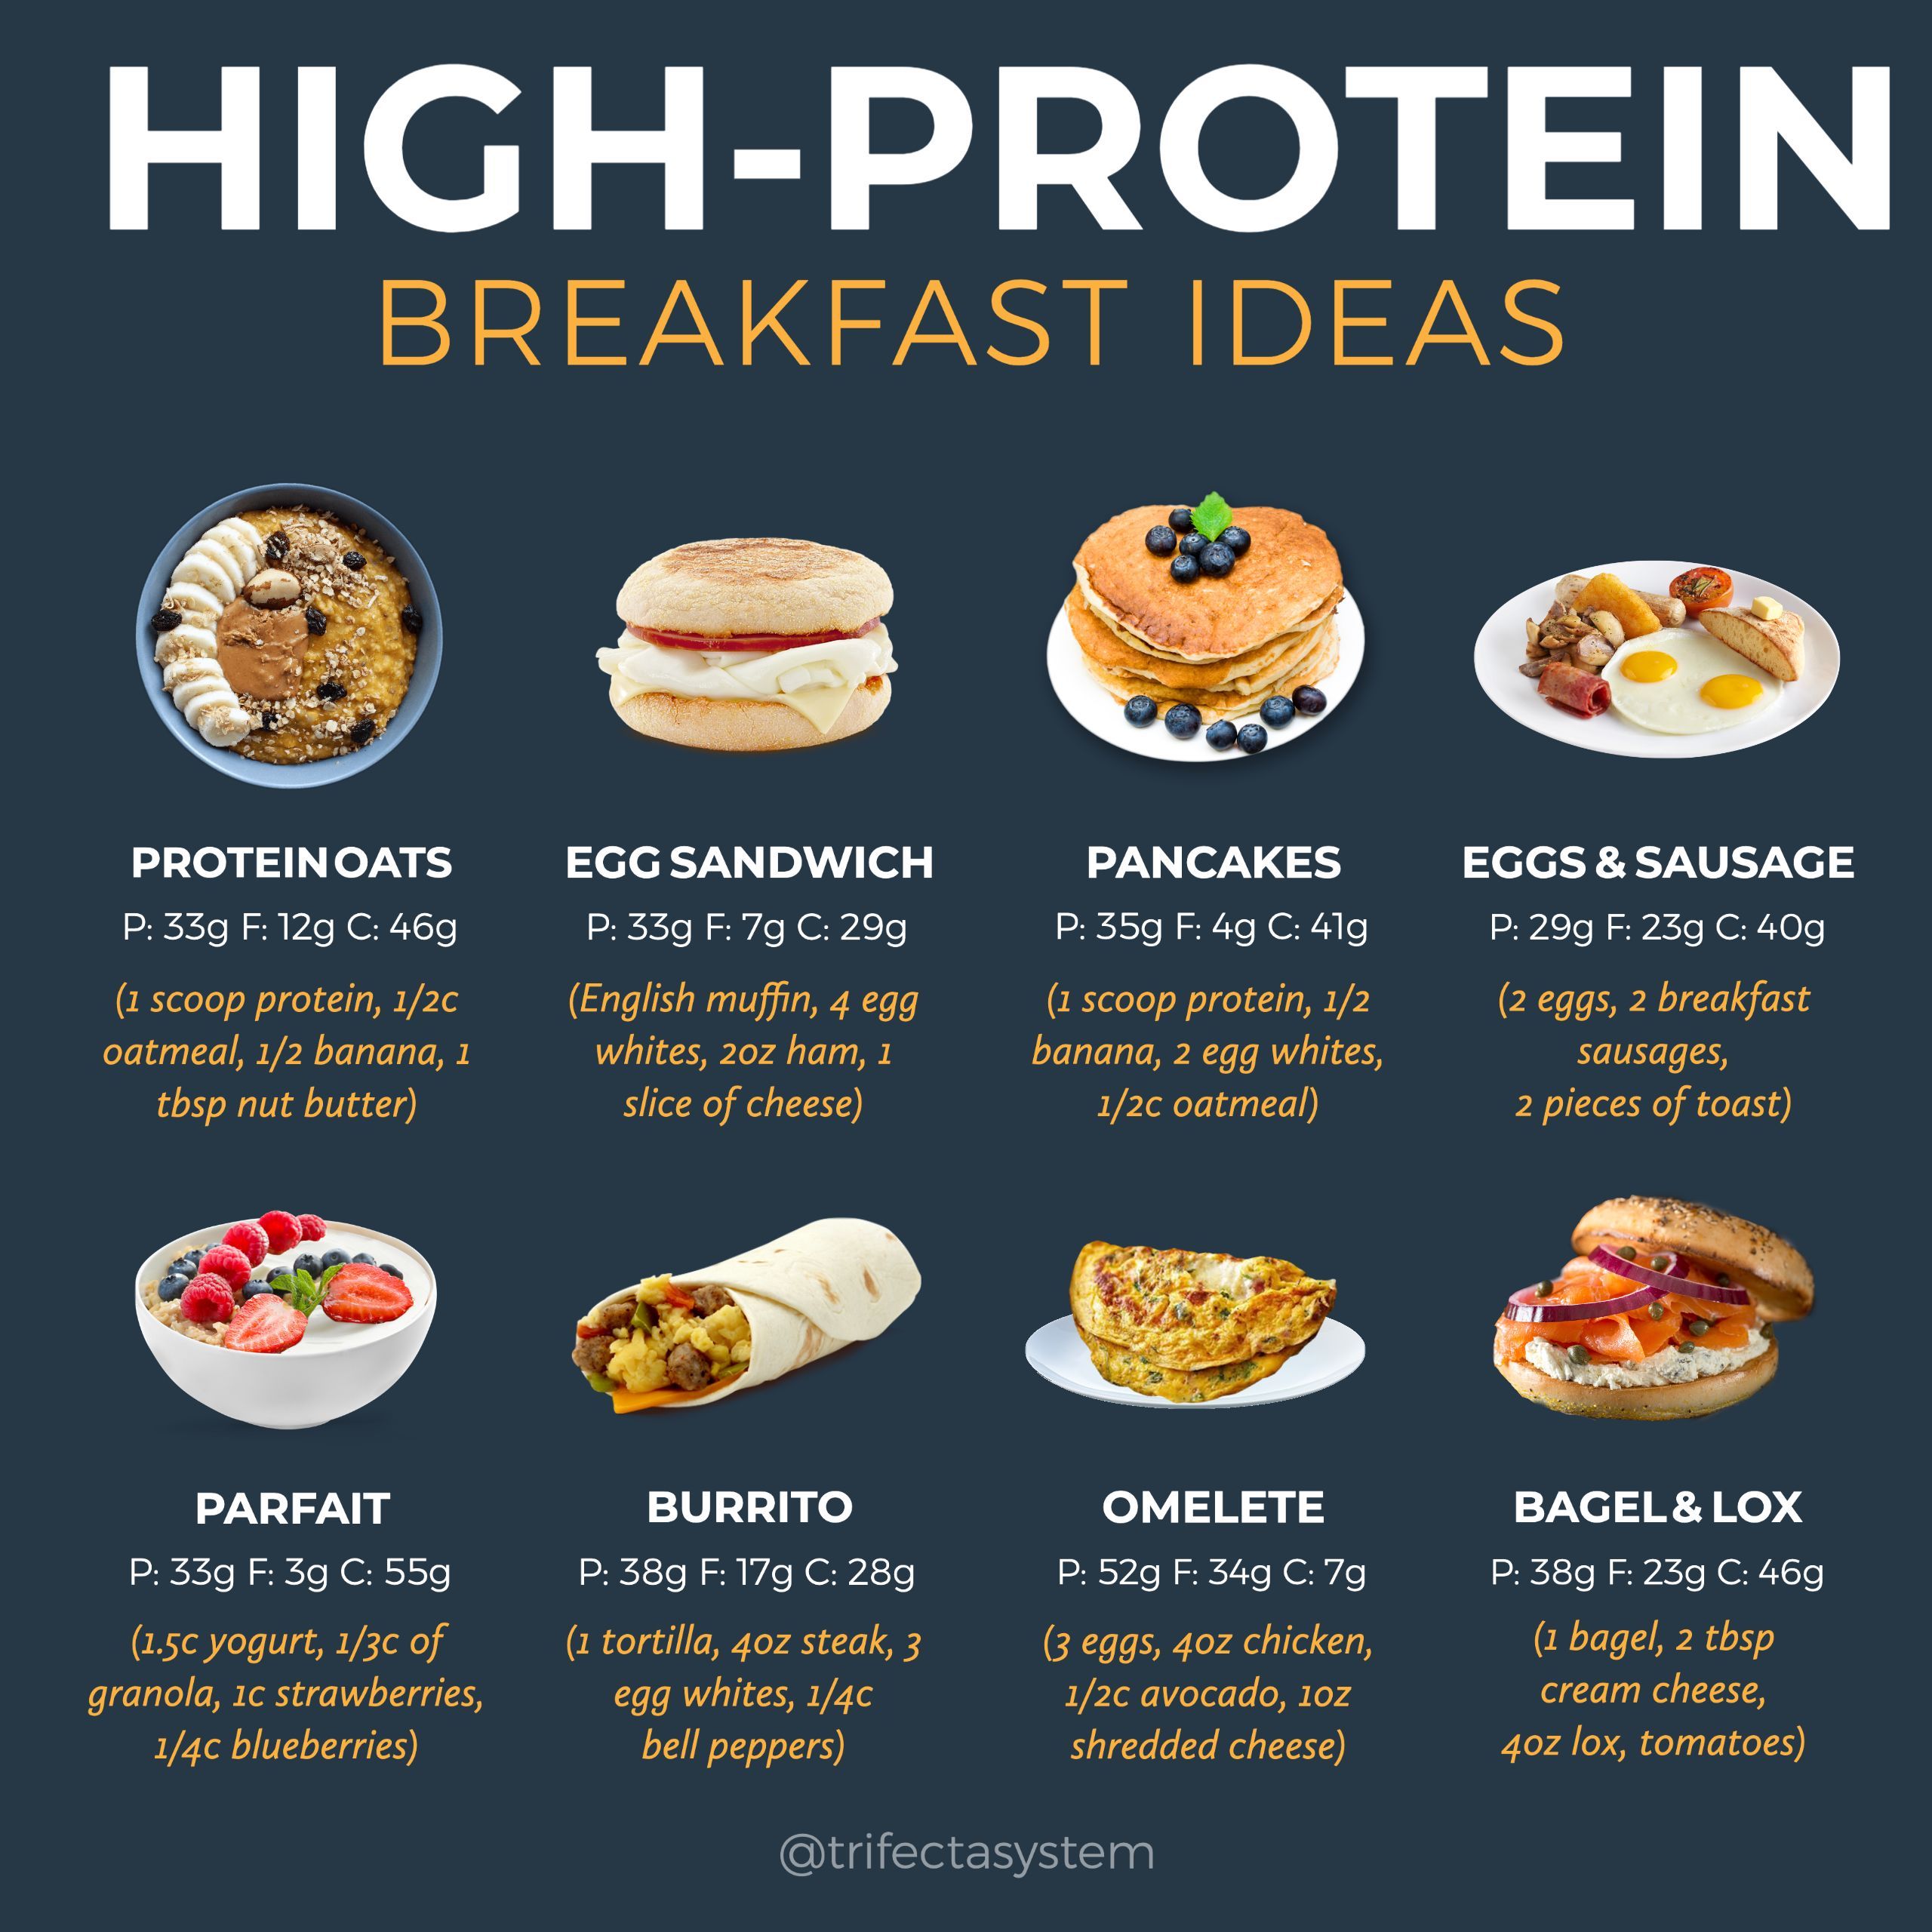 fitness Meals protein